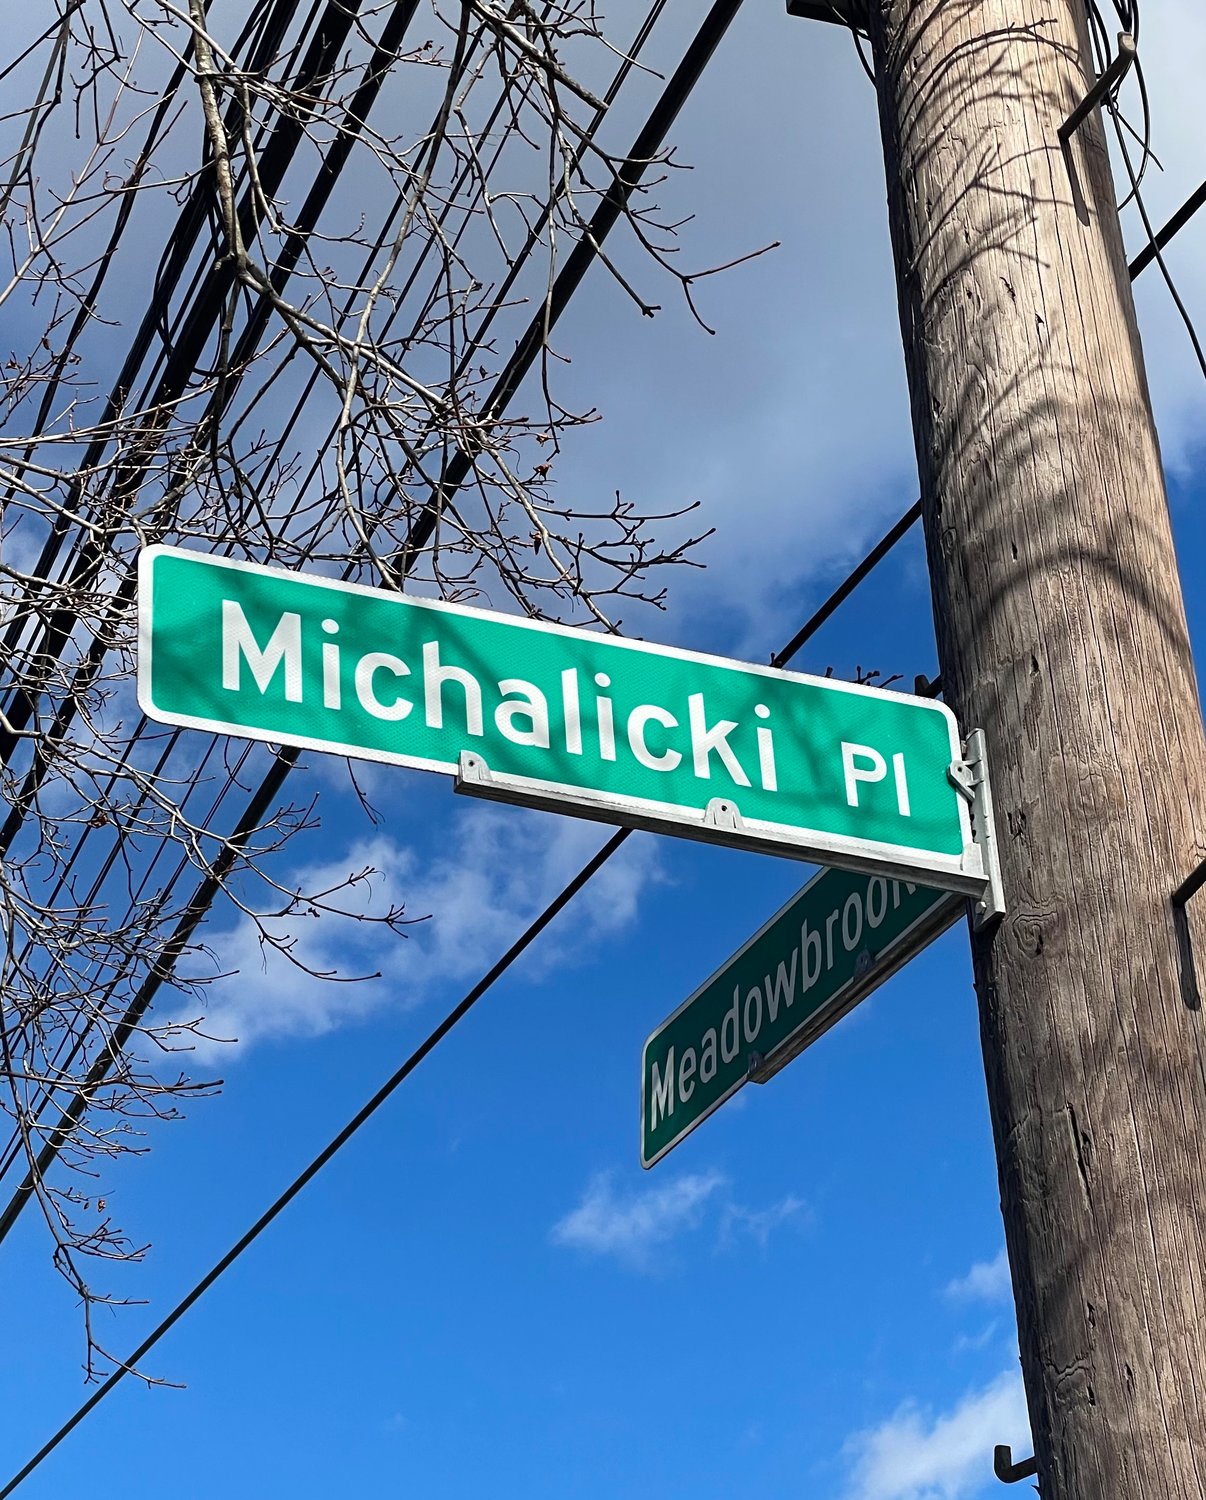 Michalicki Place, in North Merrick, is just one of the streets where permeable pavements and rain gardens were installed to help reduce storm damage.